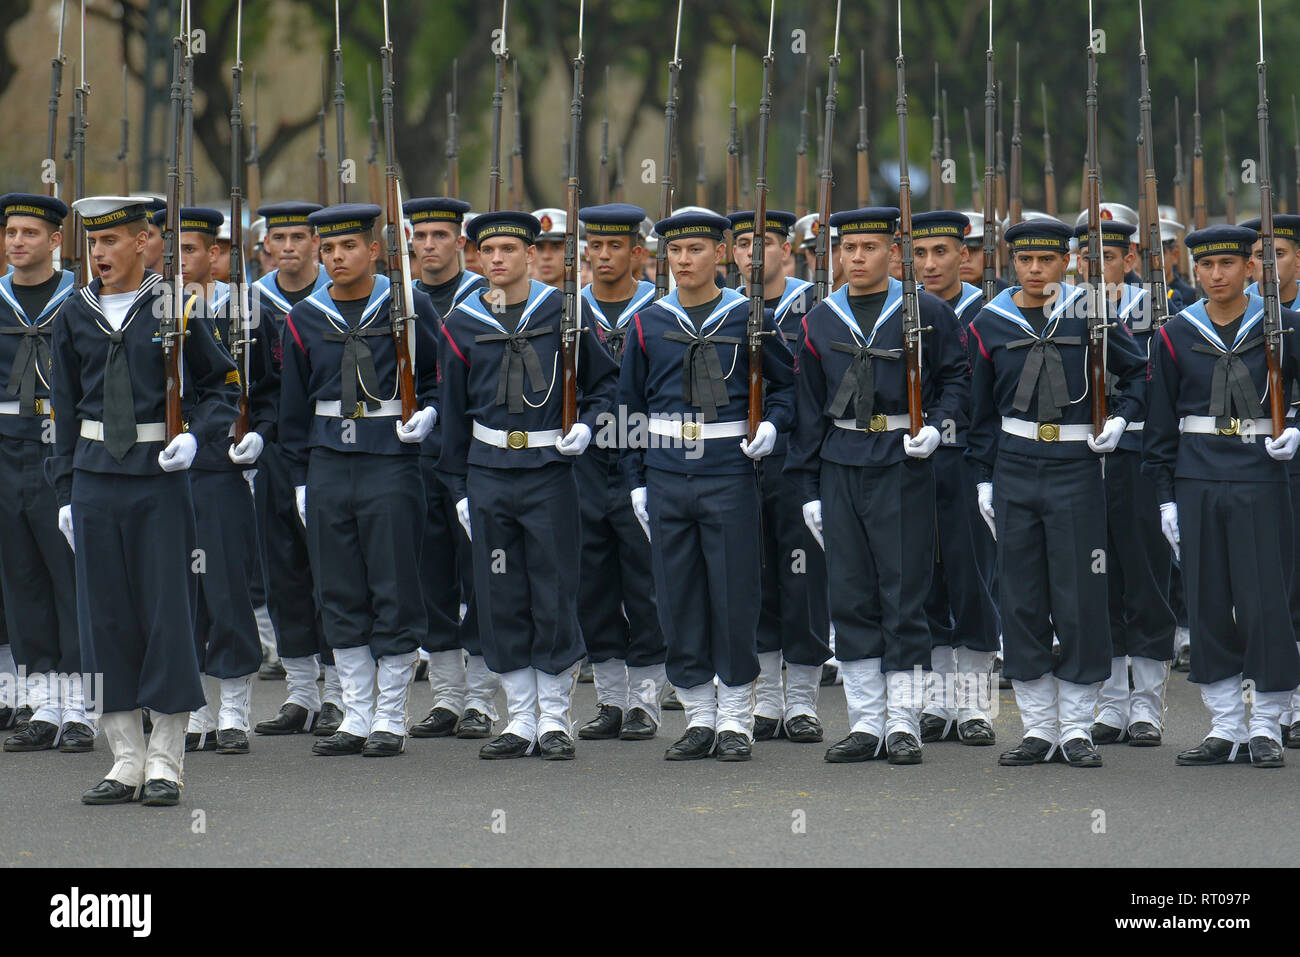 Buenos Aires, Argentina - Jul 11, 2016: Argentine navy sailors at the military parade during celebrations of the bicentennial anniversary of Argentine Stock Photo